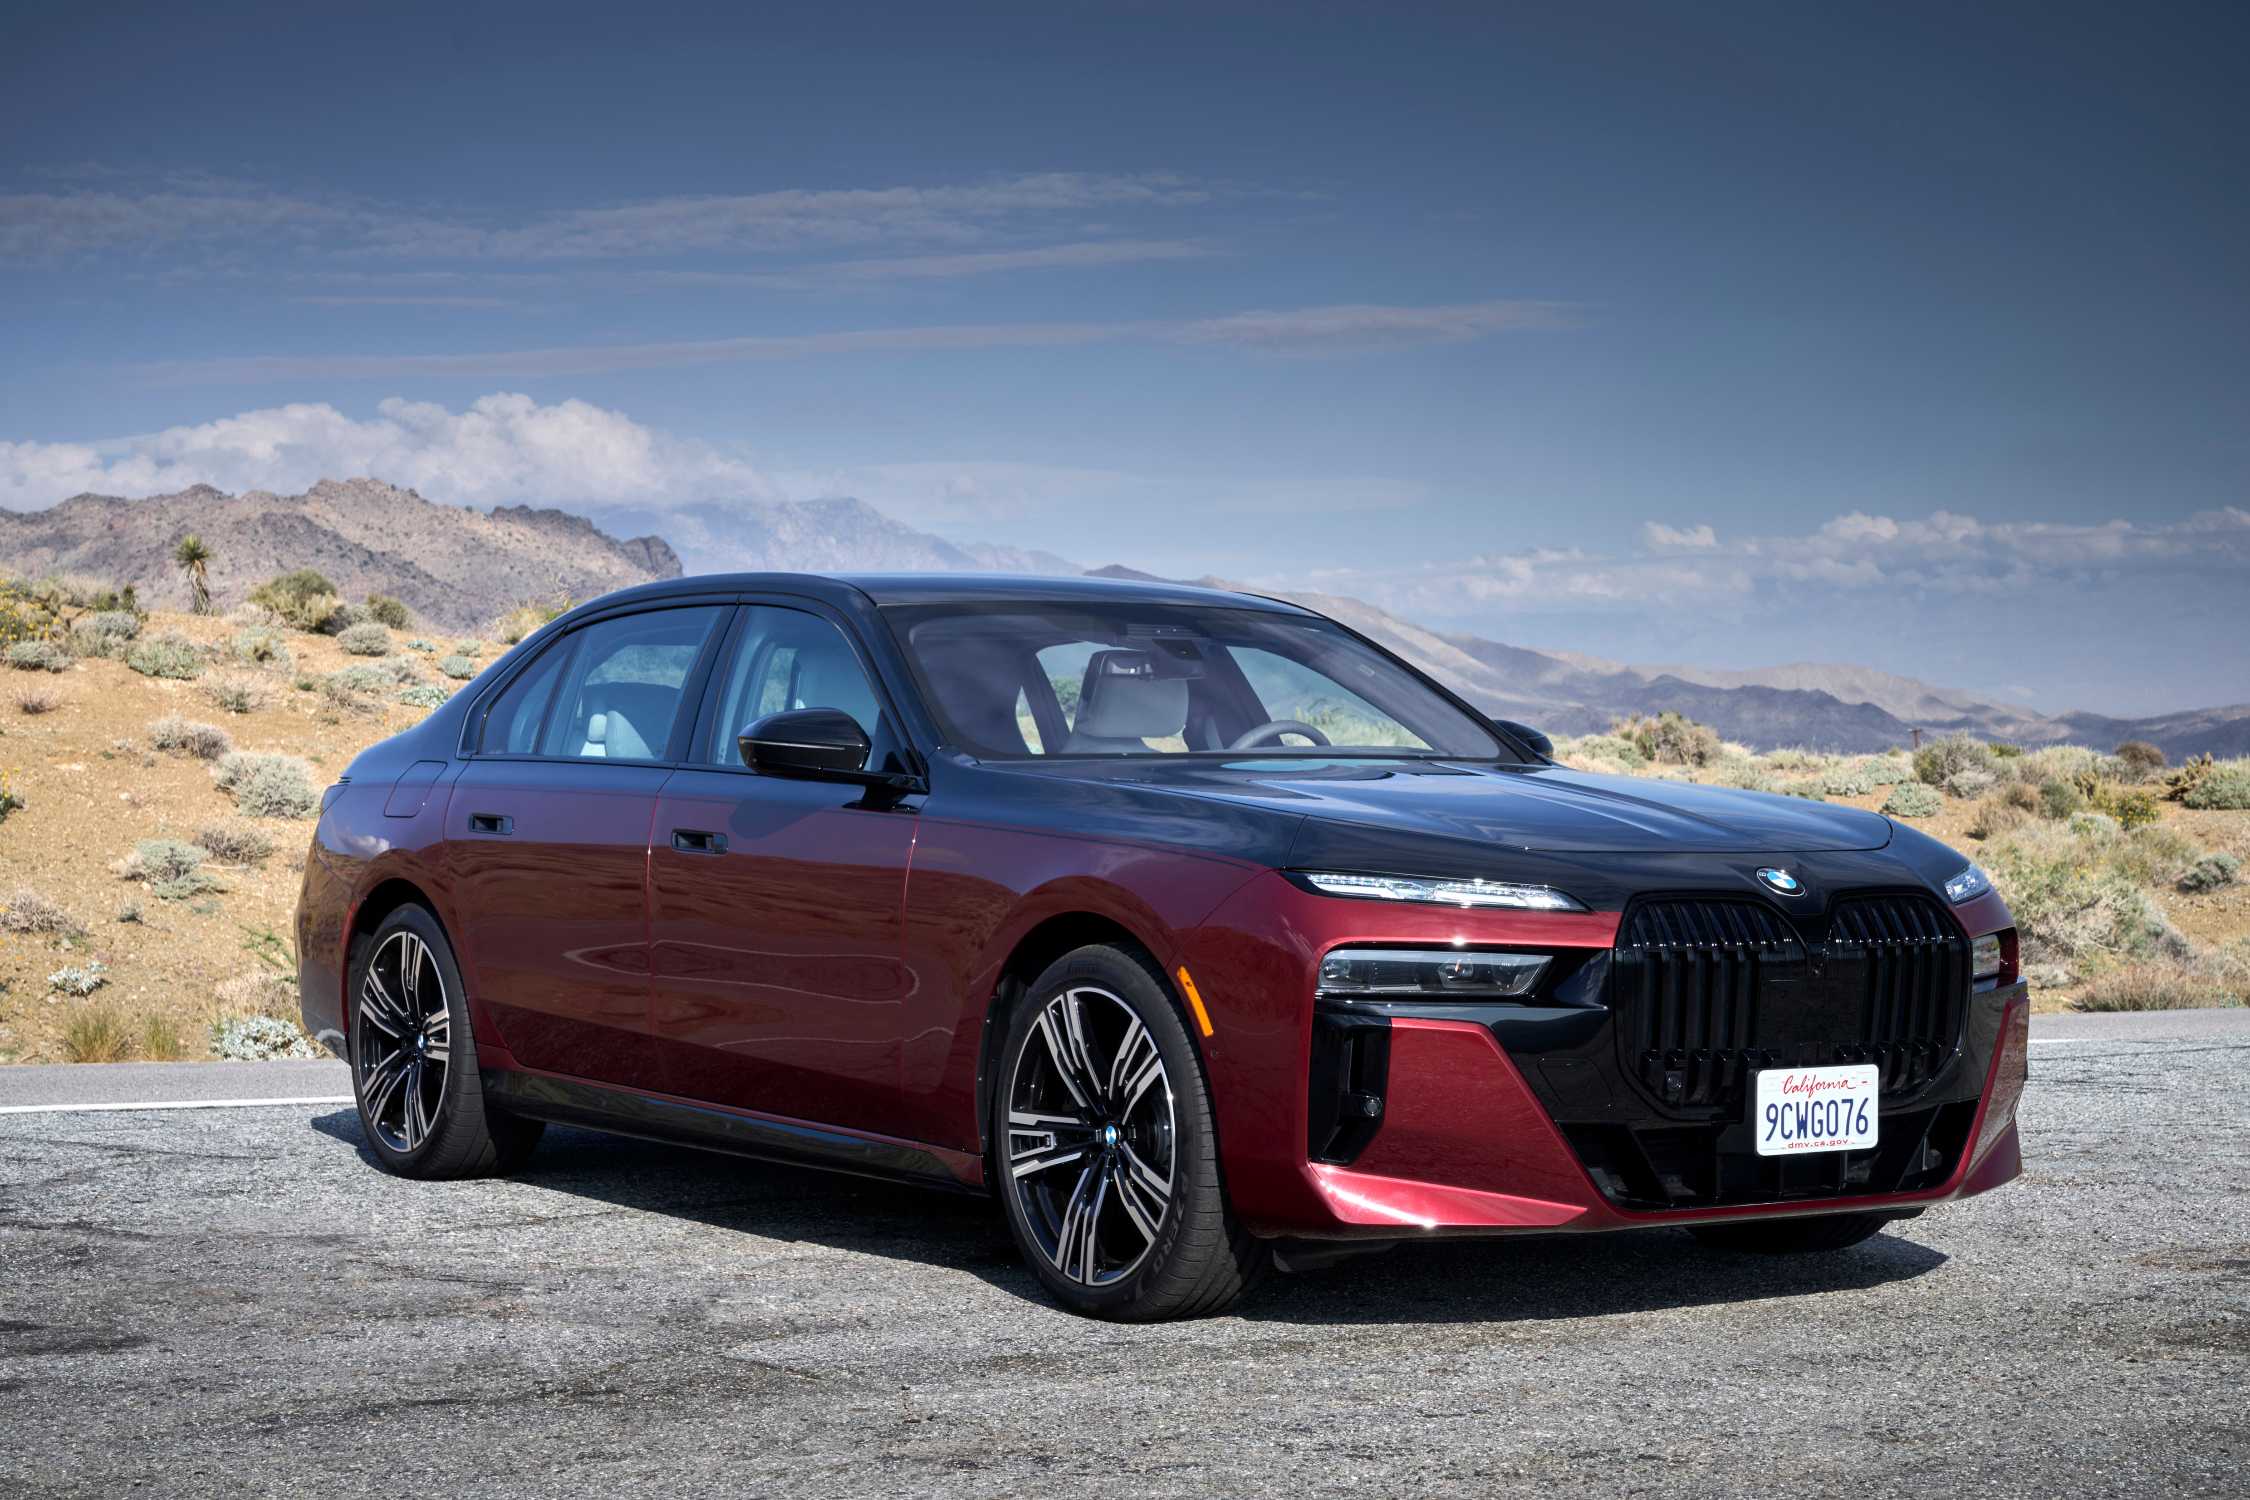 The new BMW 760i xDrive Aventurin Red Metallic Two-Tone On Location Palm Springs (10/2022).